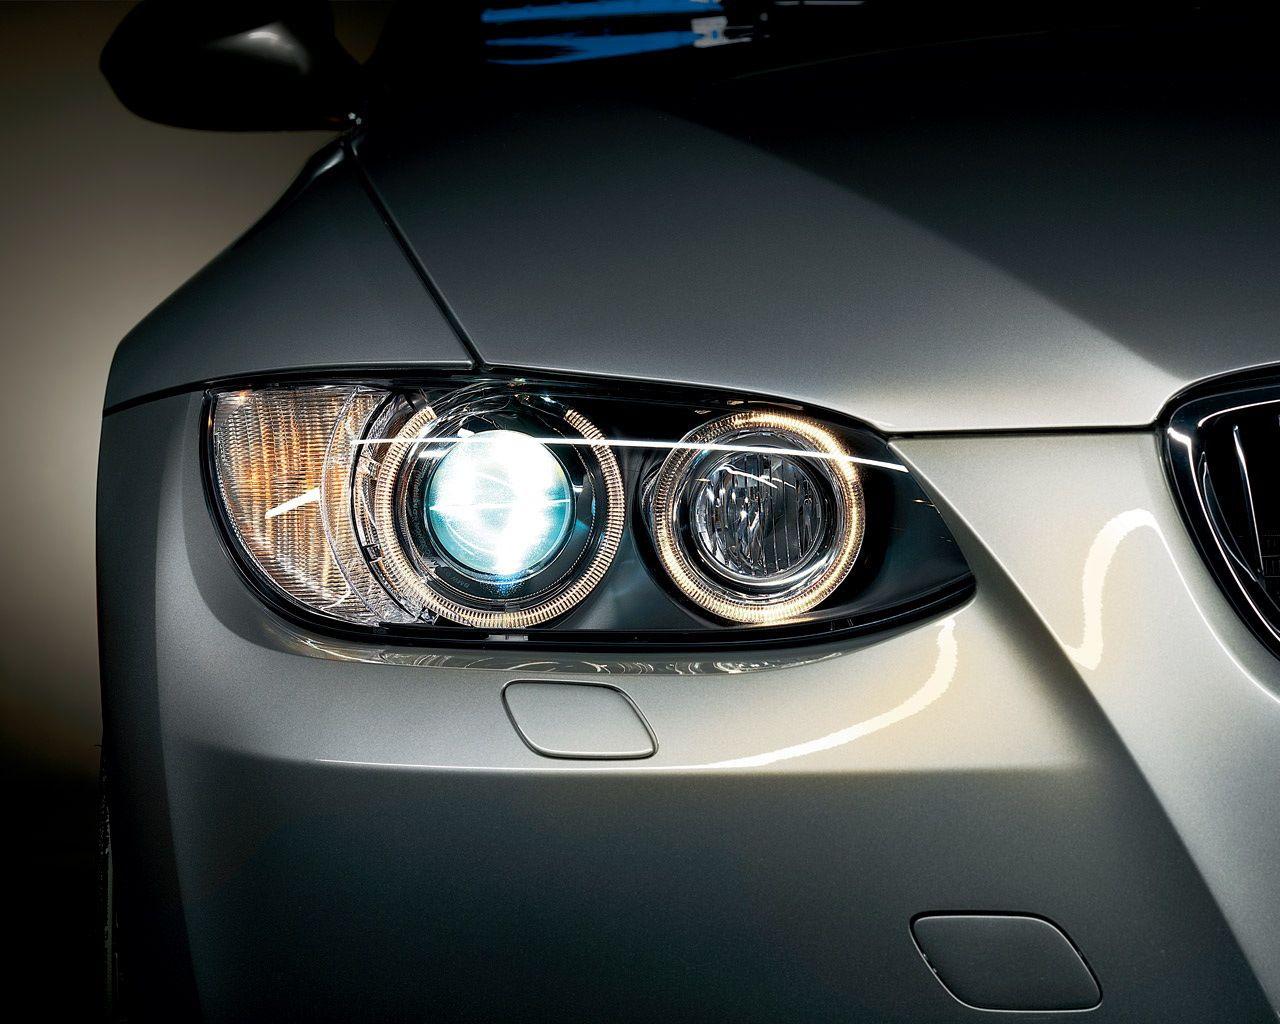 The silver car headlight wallpaper and image